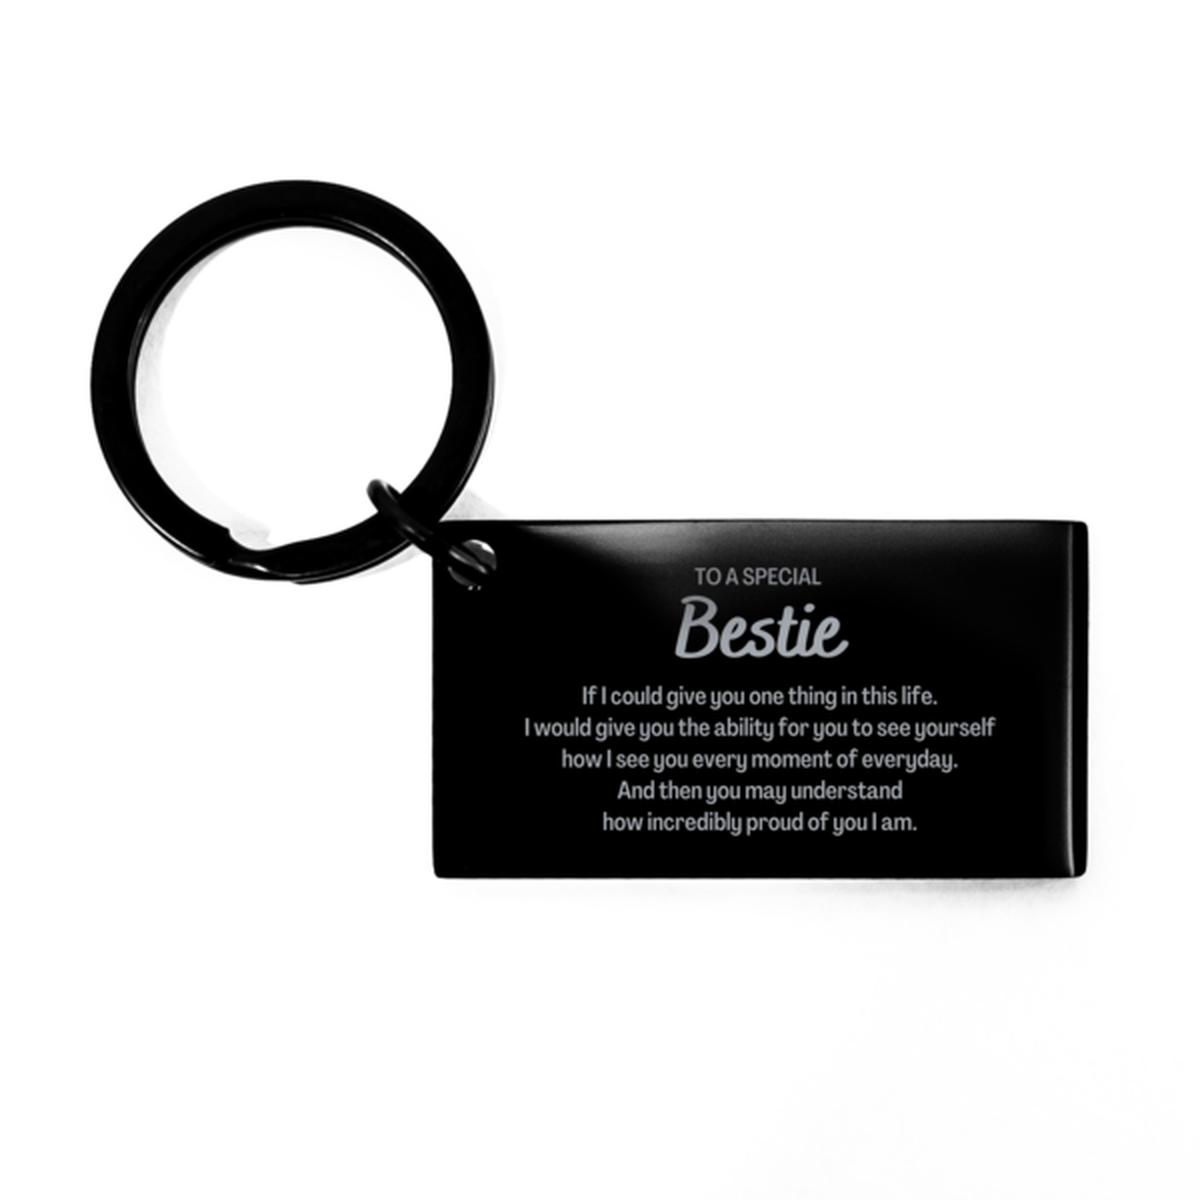 To My Bestie Keychain, Gifts For Bestie Engraved, Inspirational Gifts for Christmas Birthday, Epic Gifts for Bestie To A Special Bestie how incredibly proud of you I am